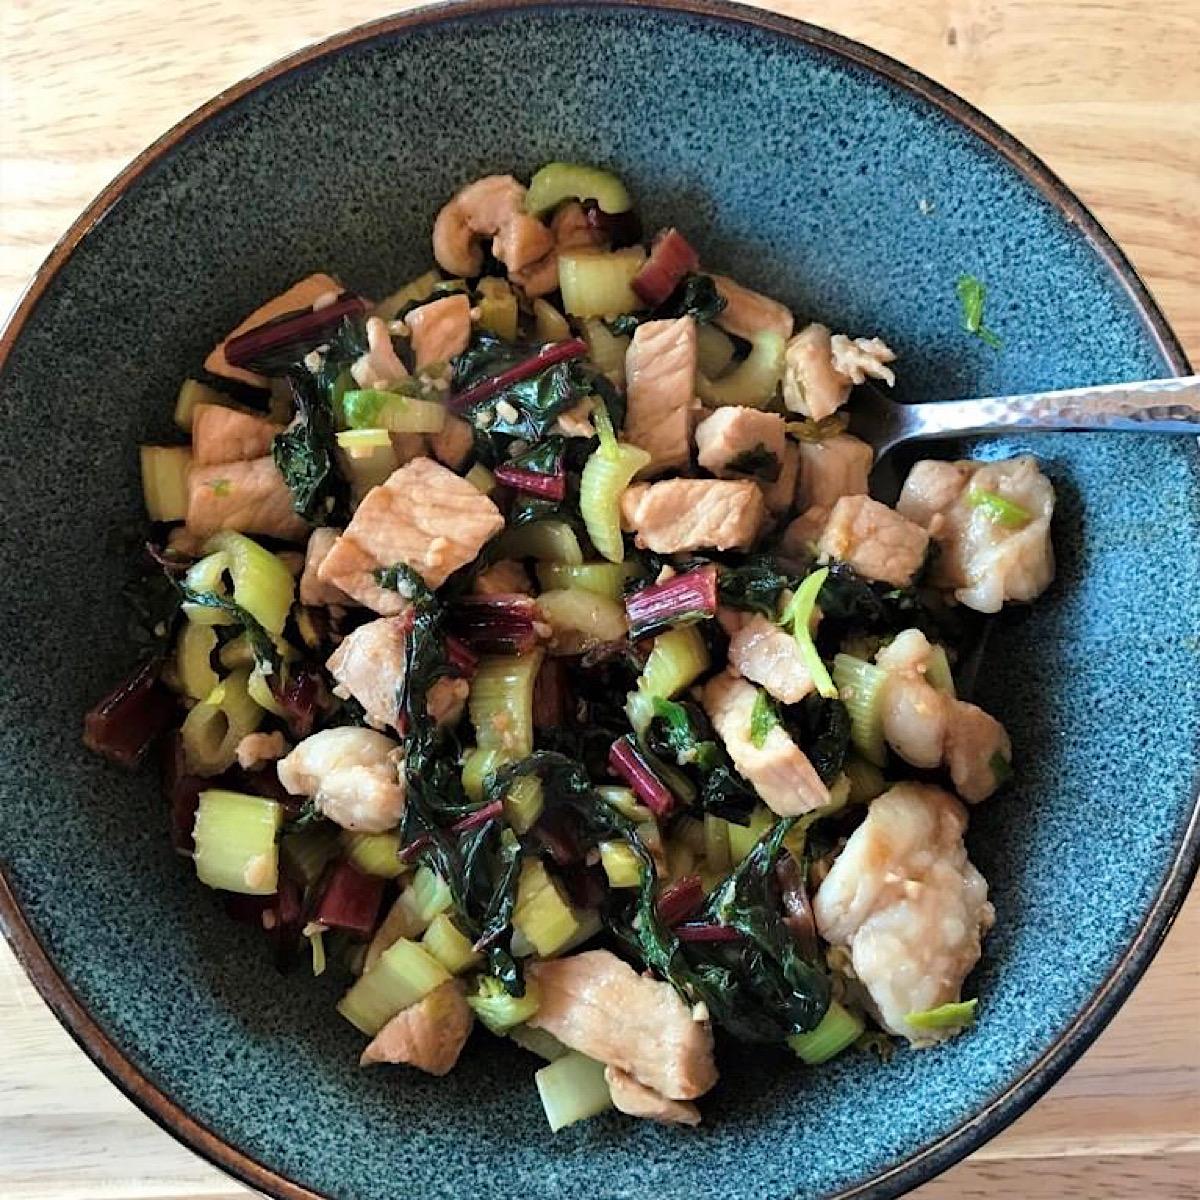 Low carb stir fry made with pork and swiss chard